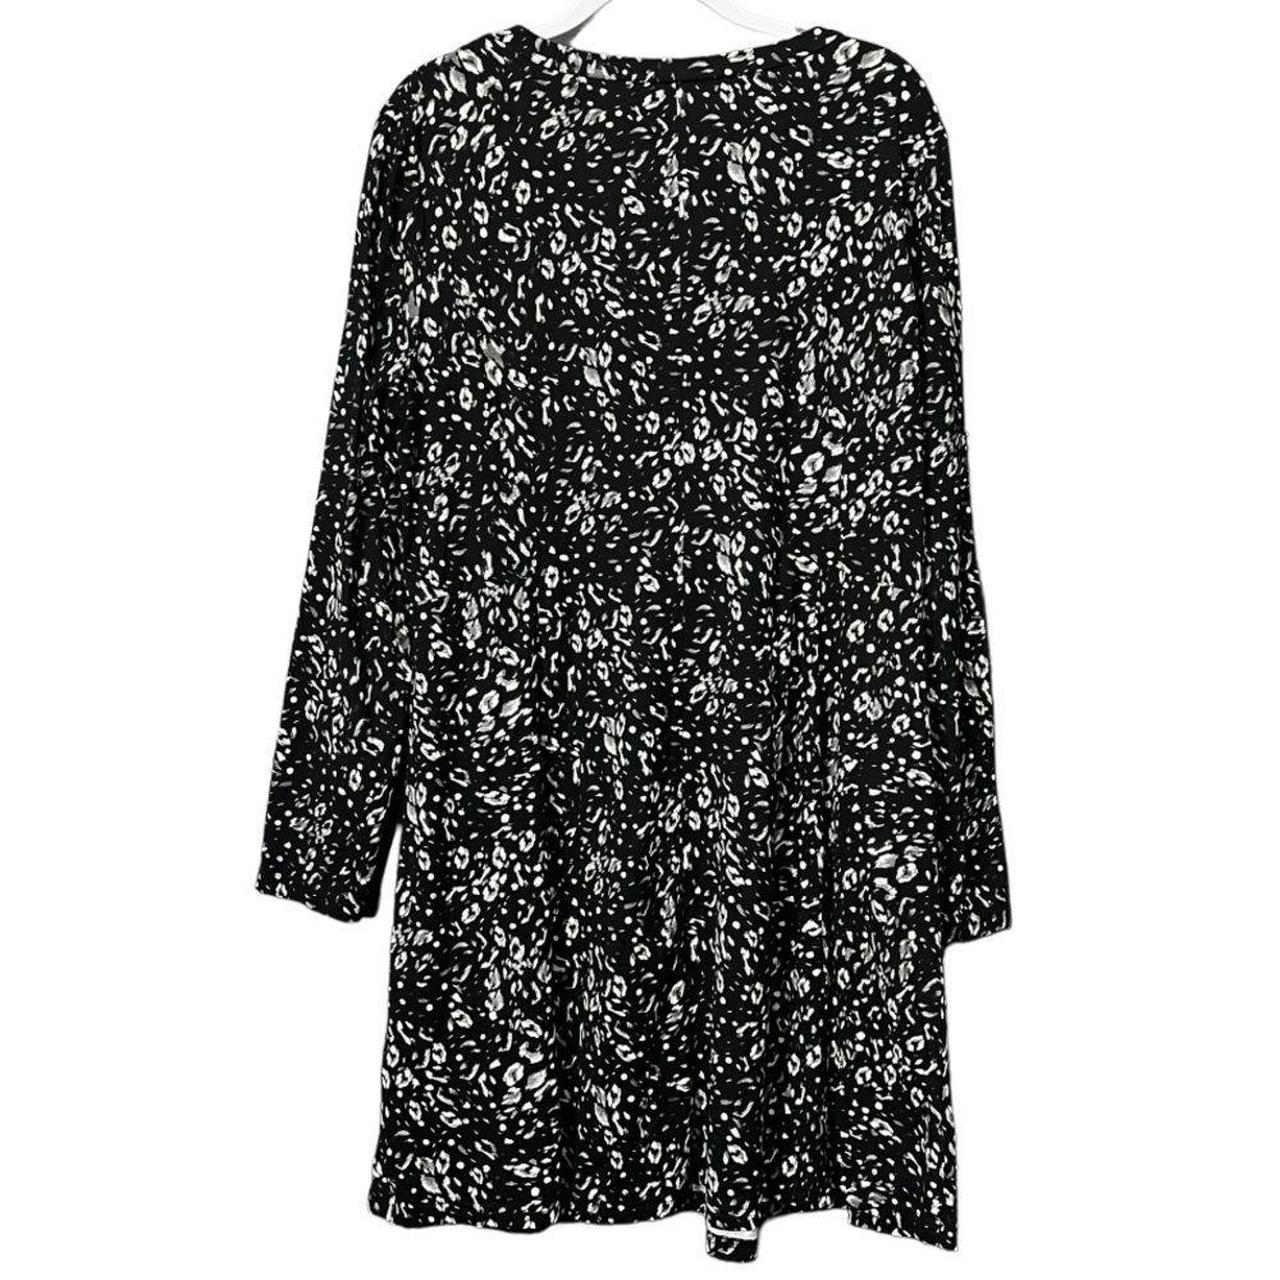 New Look Women's Black and Grey Dress (3)